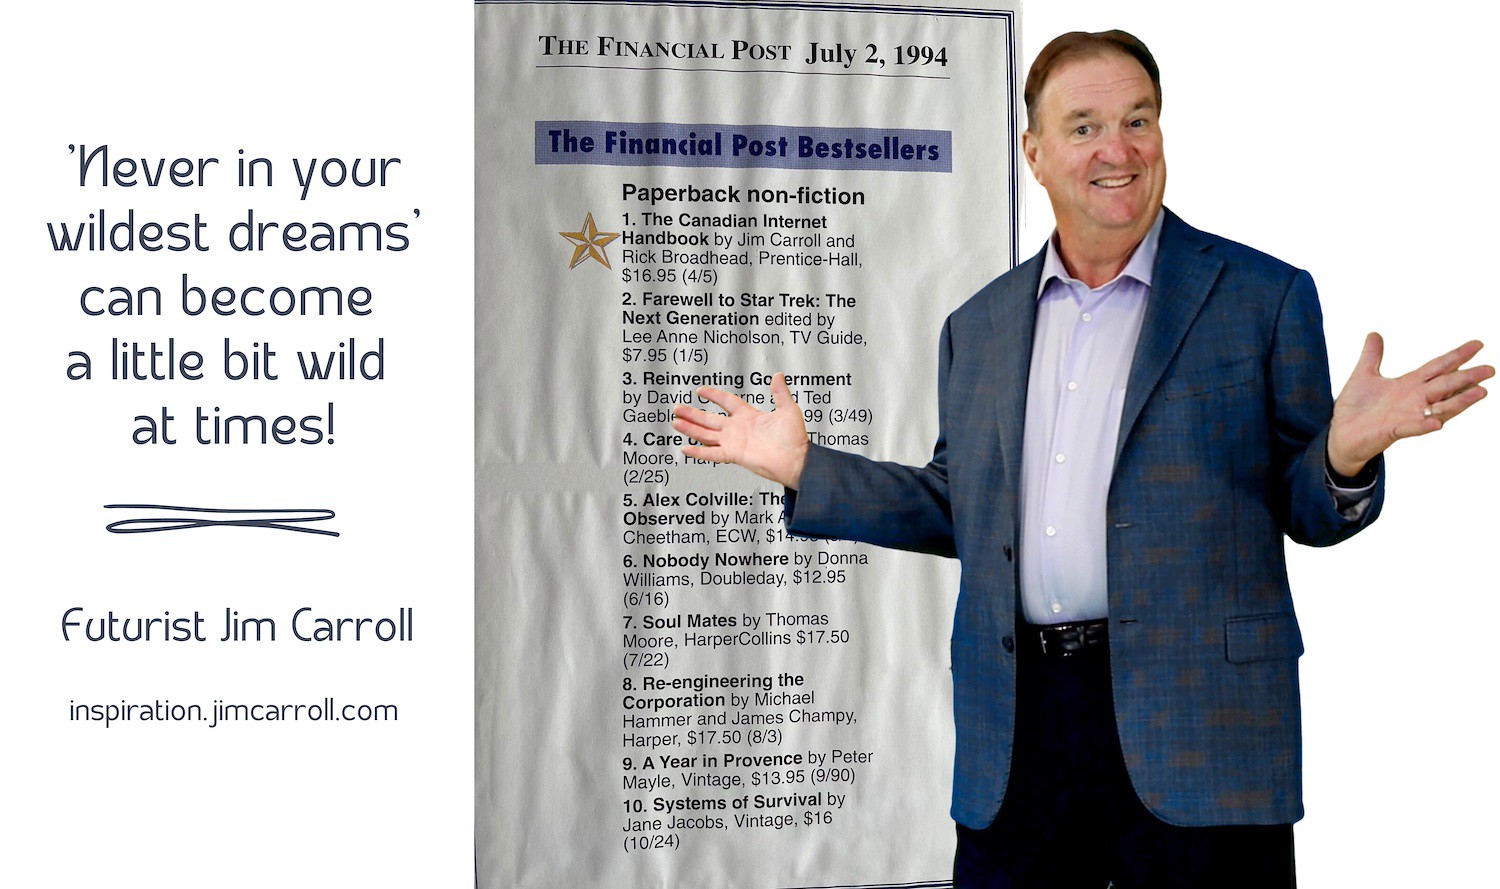 "' 'Never in your wildest dreams ' can become a little bit wild at times!" - Futurist Jim Carroll